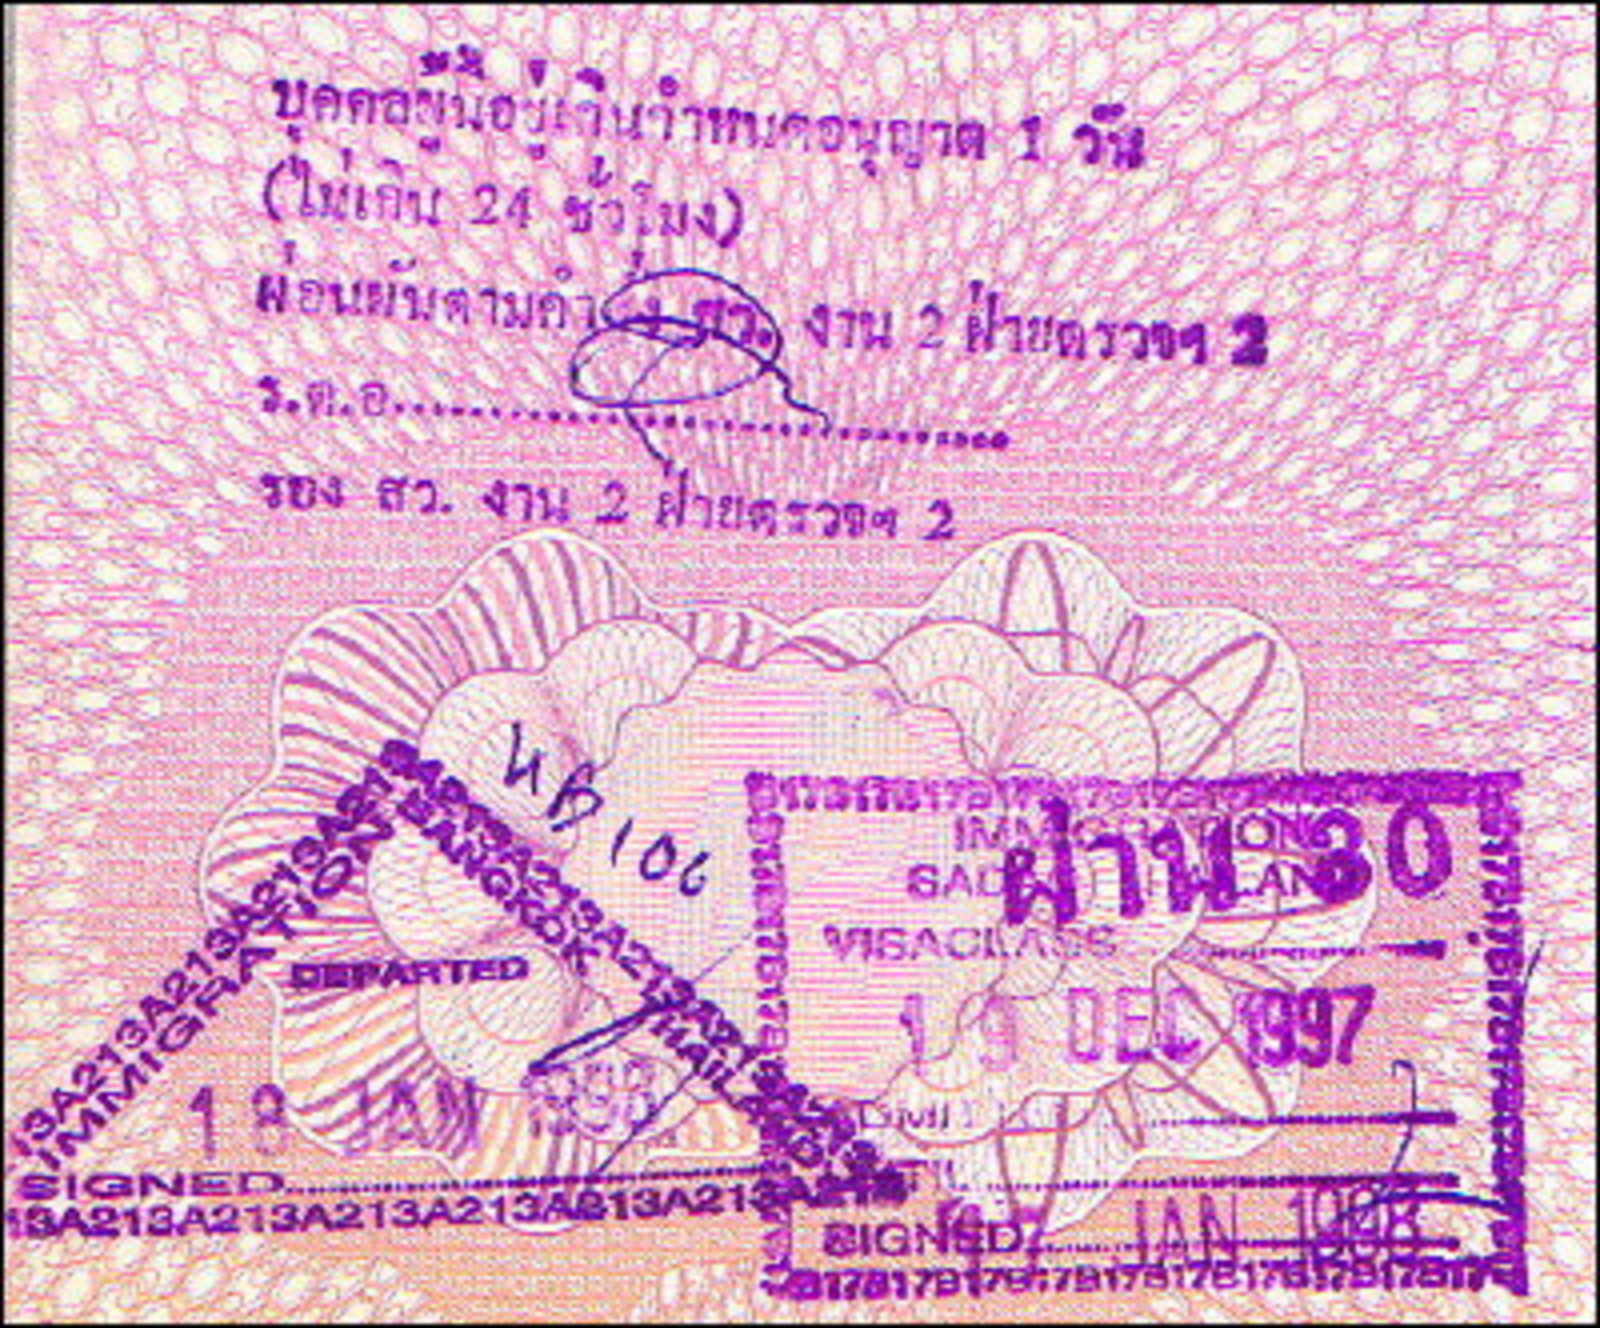 Thai entry and exit stamps